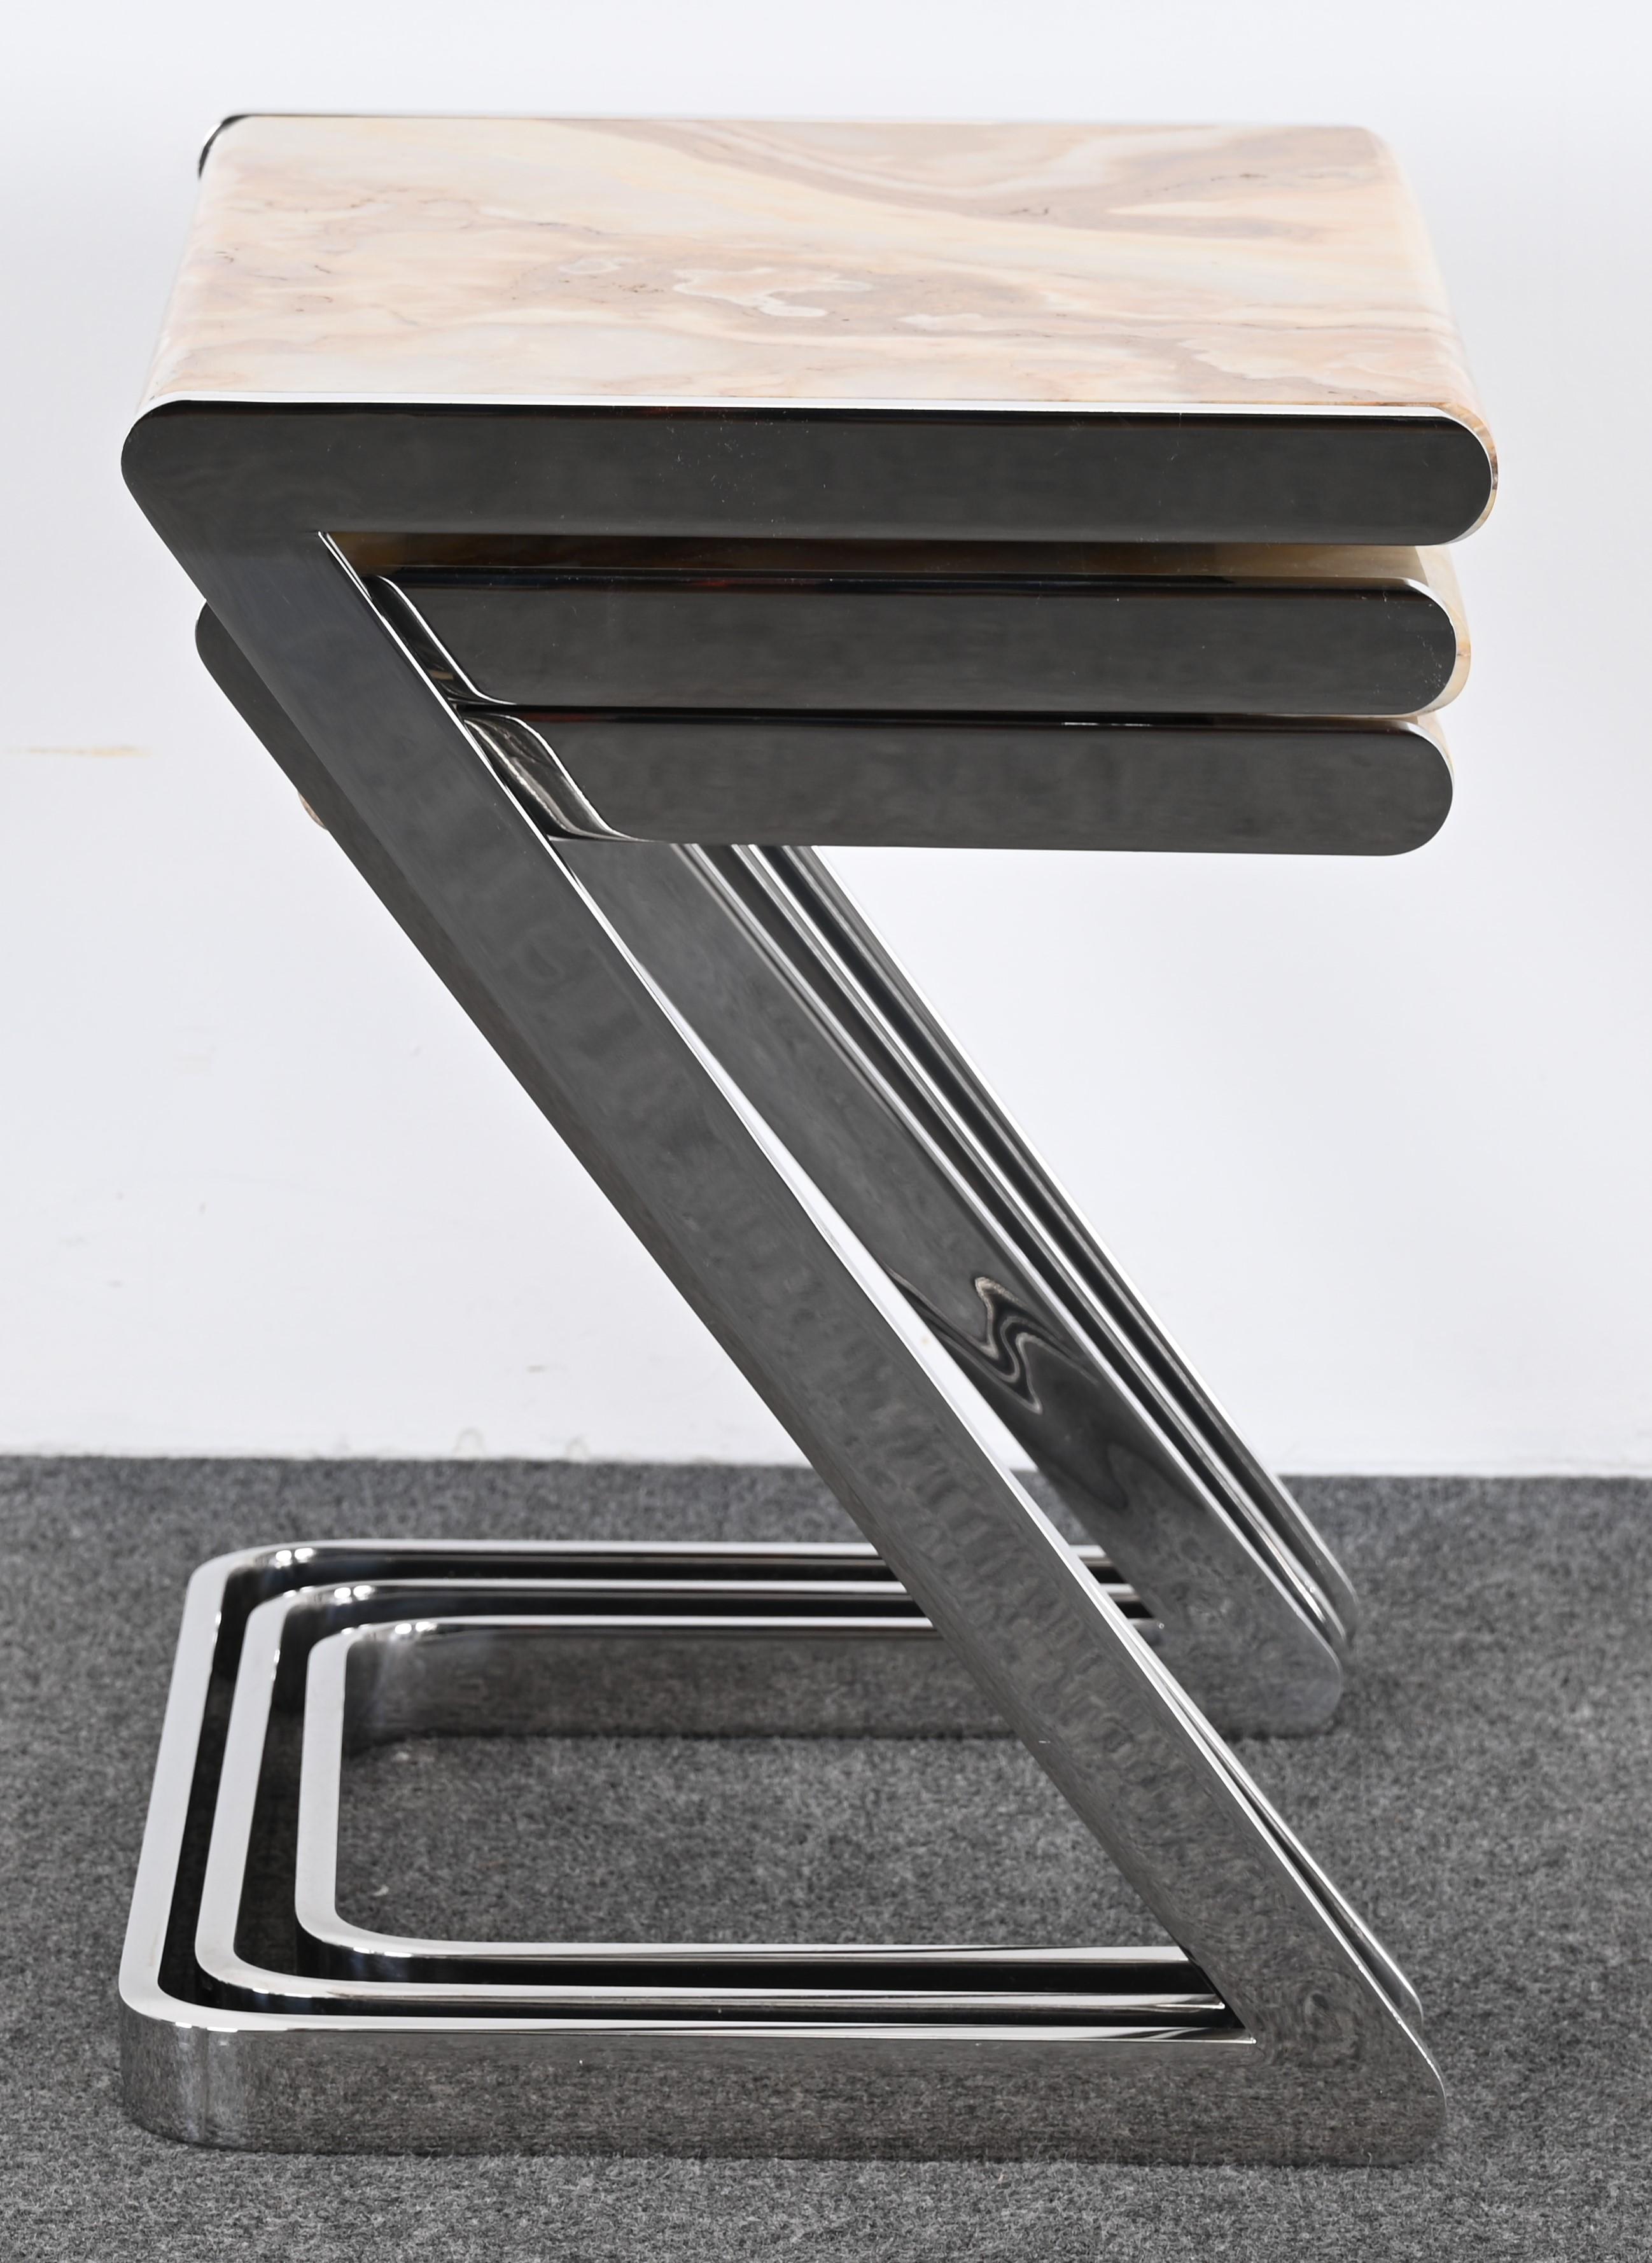 Onyx and Stainless Steel Nesting Tables by Brueton, 1980s For Sale 8